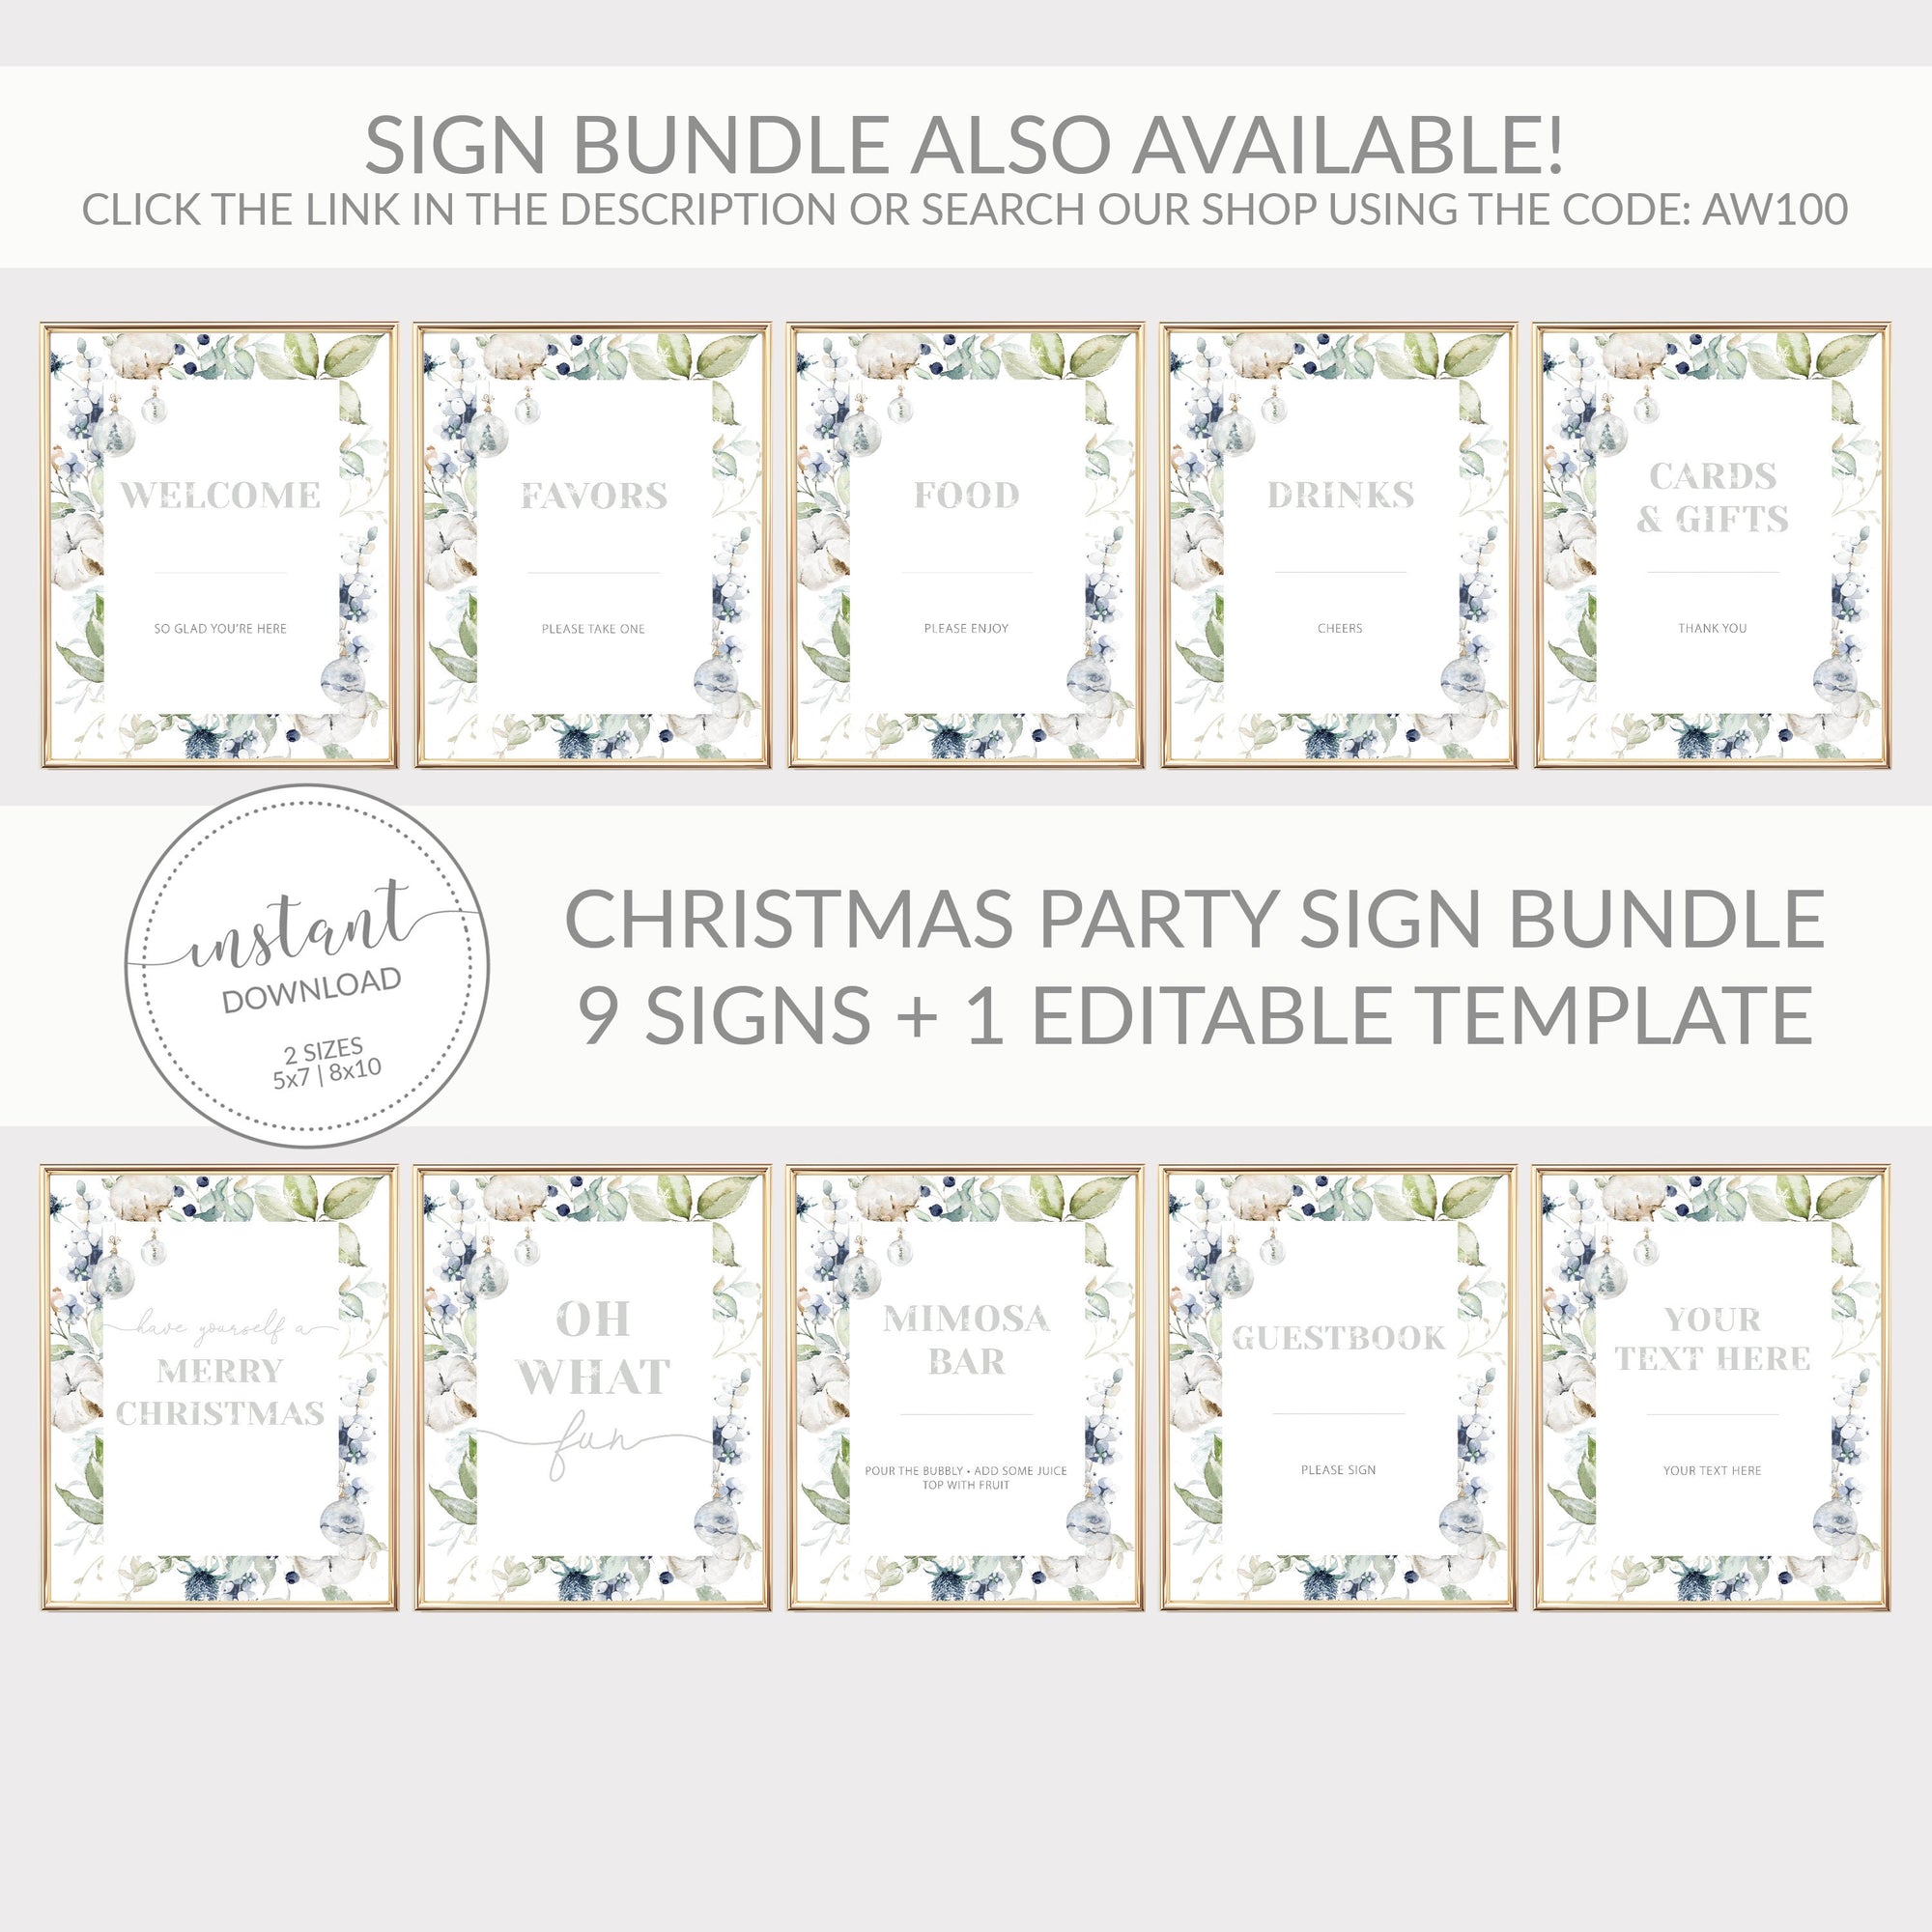 Christmas Party Favors Sign Printable, Holiday Party Decorations, Christmas Wedding, Baby Shower, Bridal Shower Sign, INSTANT DOWNLOAD AW100